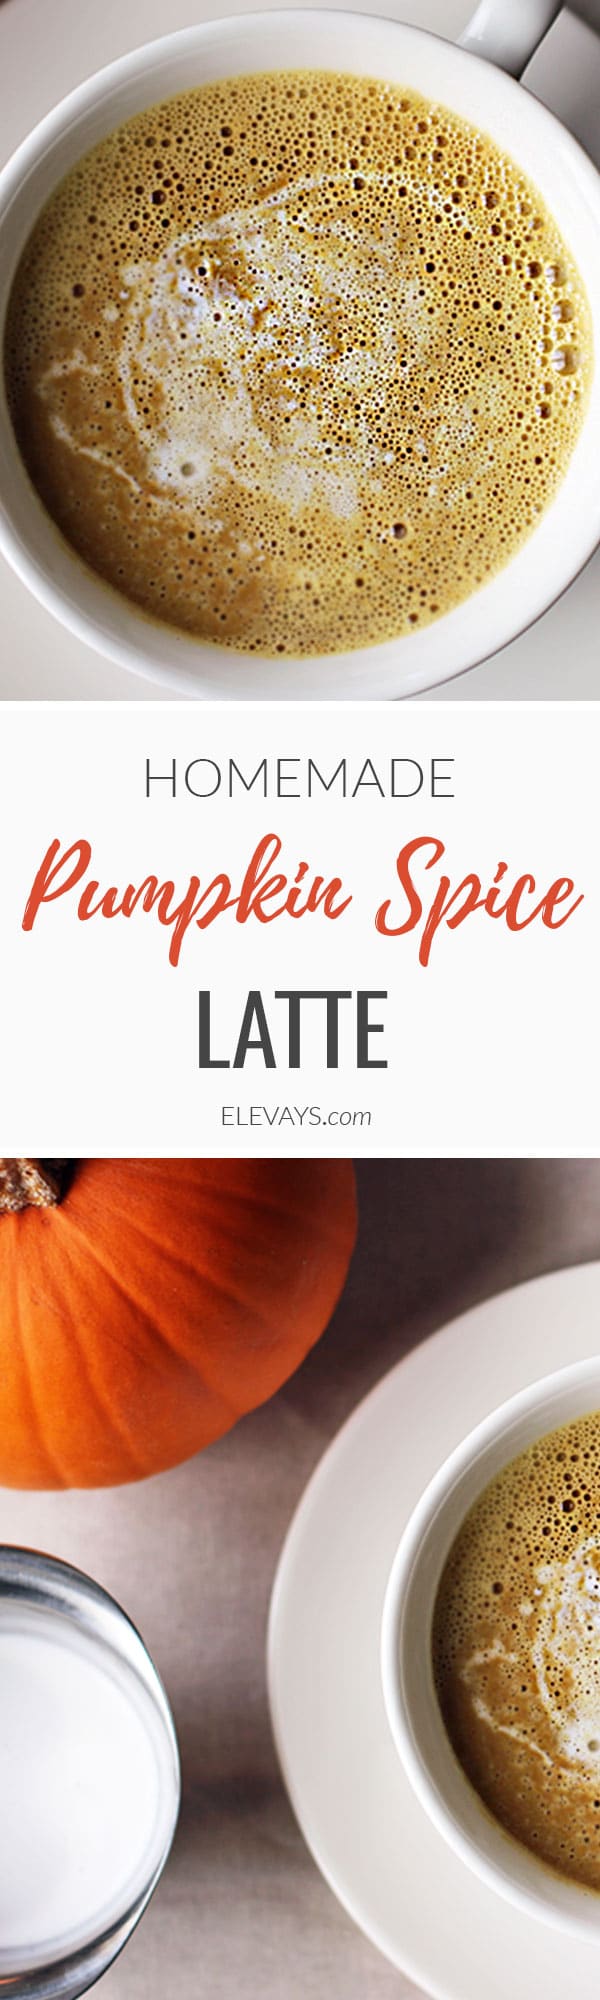 Our homemade pumpkin spice latte is like a warm fall hug and way healthier than the starbucks variety! #latte #healthydrink #pumpkin